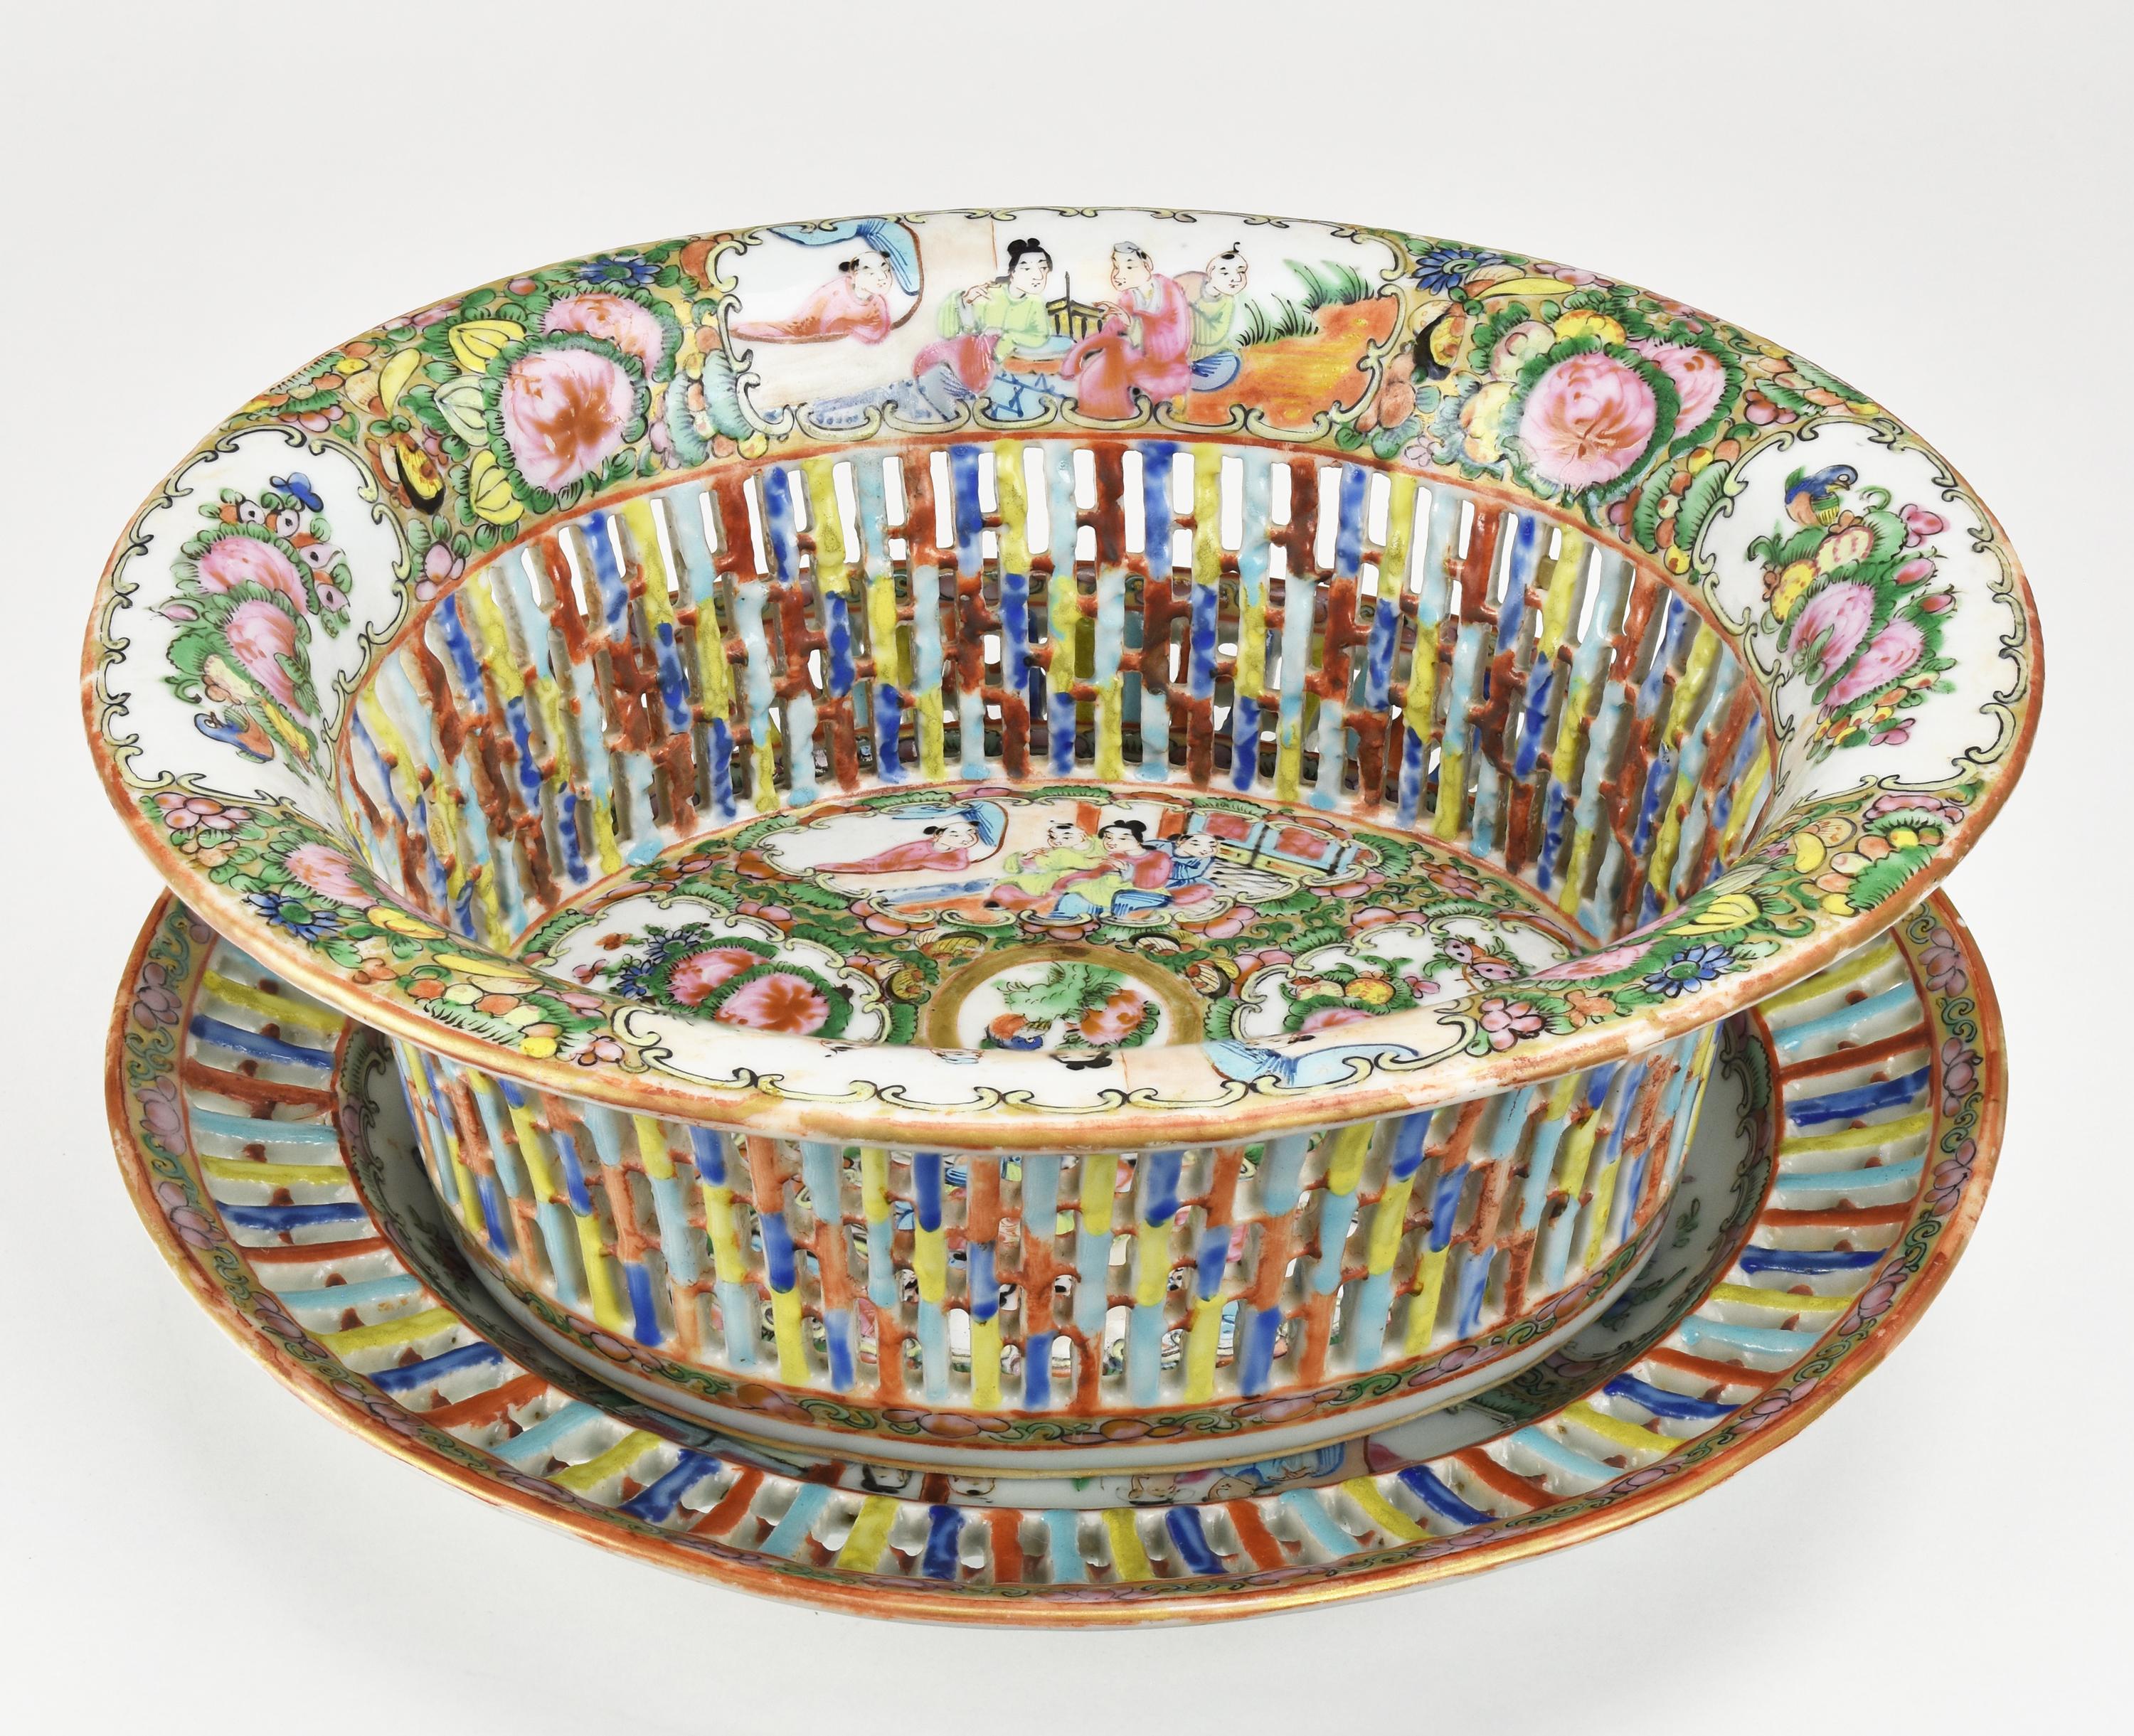 Mid-19th Century Antique Reticulated Chinese Famille Rose Medallion Porcelain Bowl or Basket For Sale